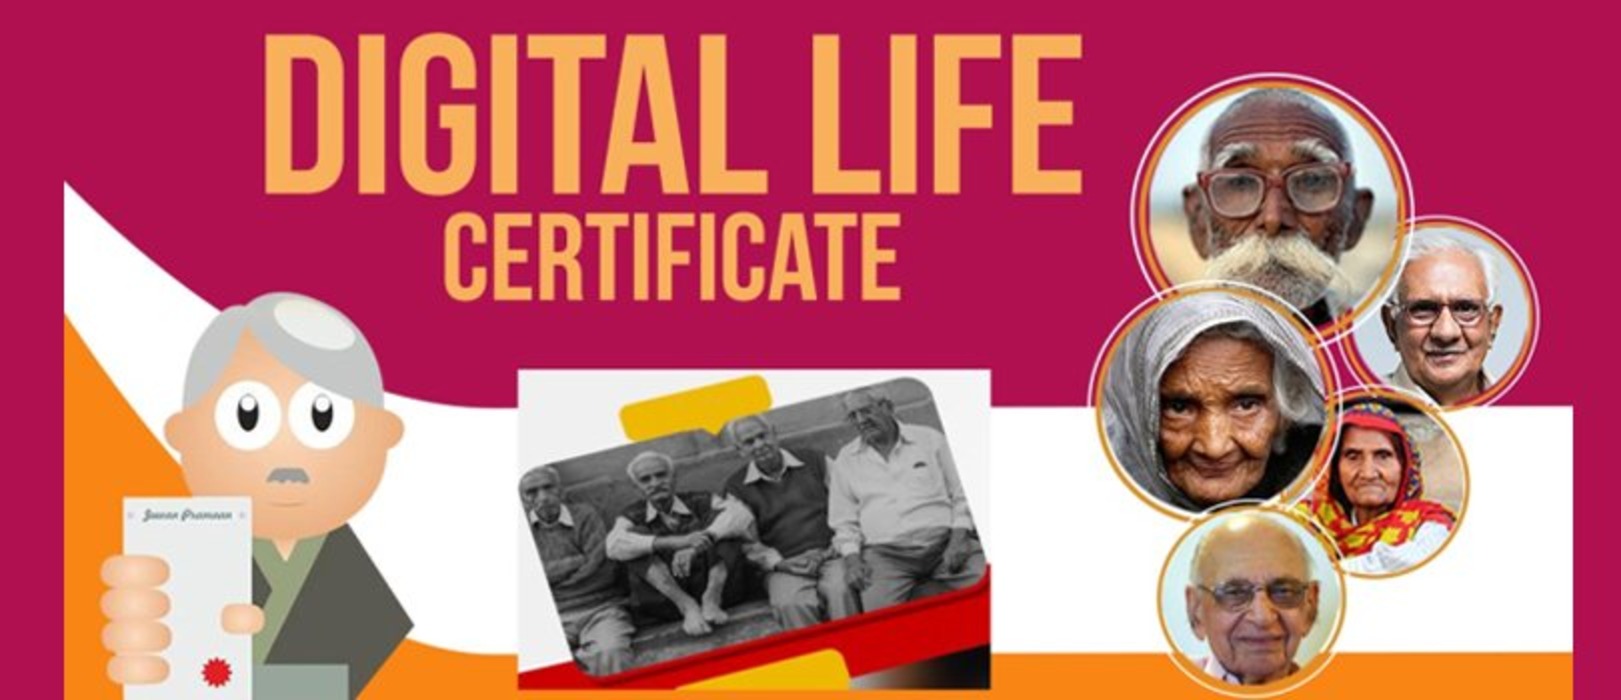 Nation-wide campaign for submission of Digital Life Certificate - CPAO OM